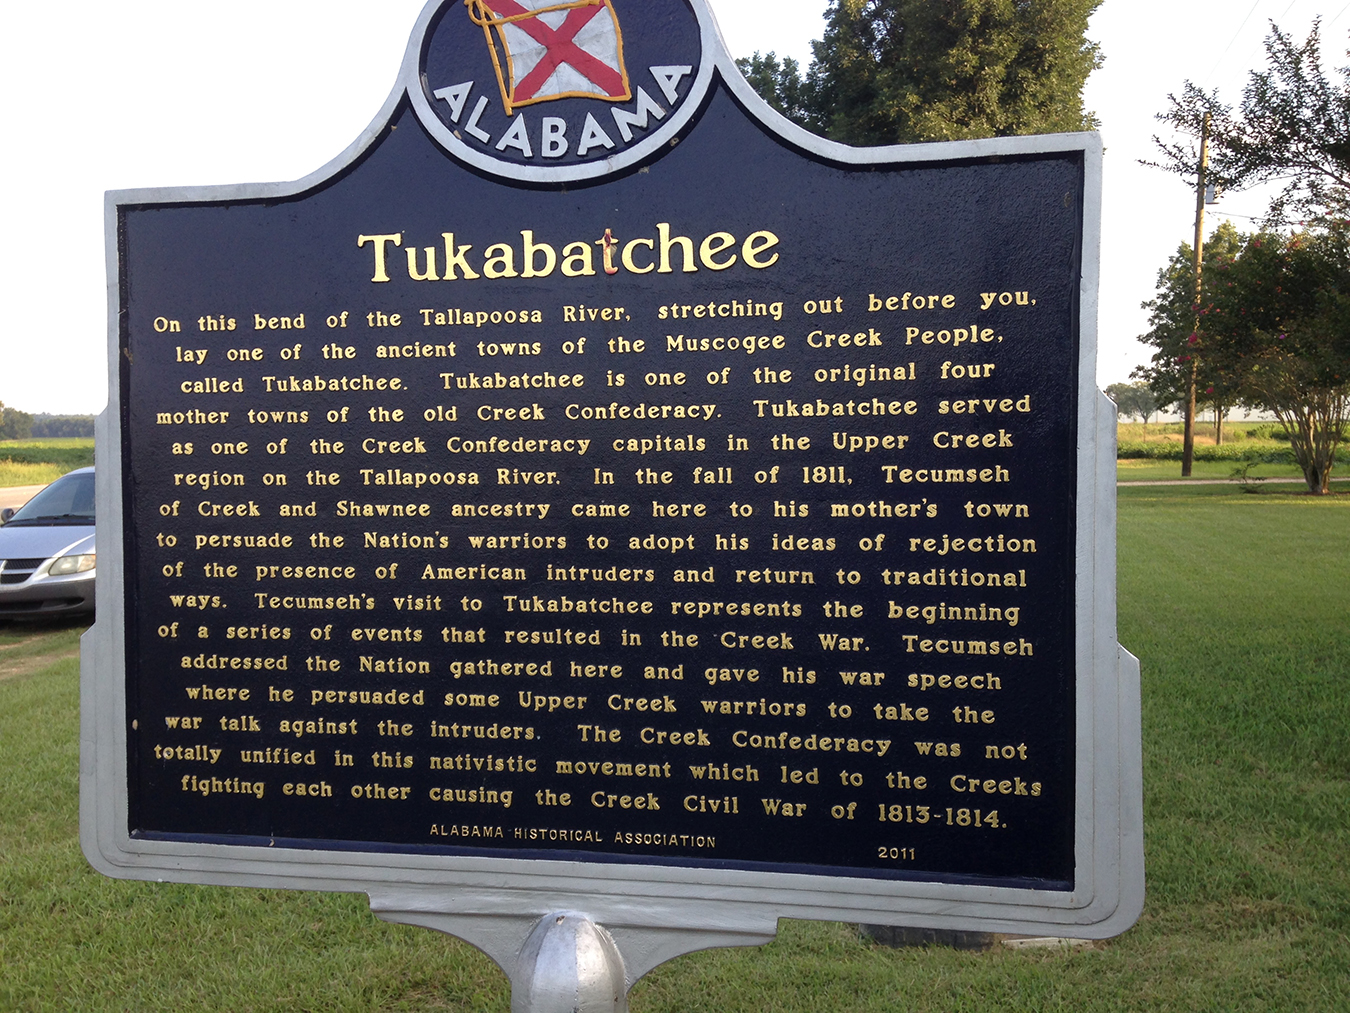 The English side of the historical marker at Tukabatchee. Photo by Leigh Bloch.